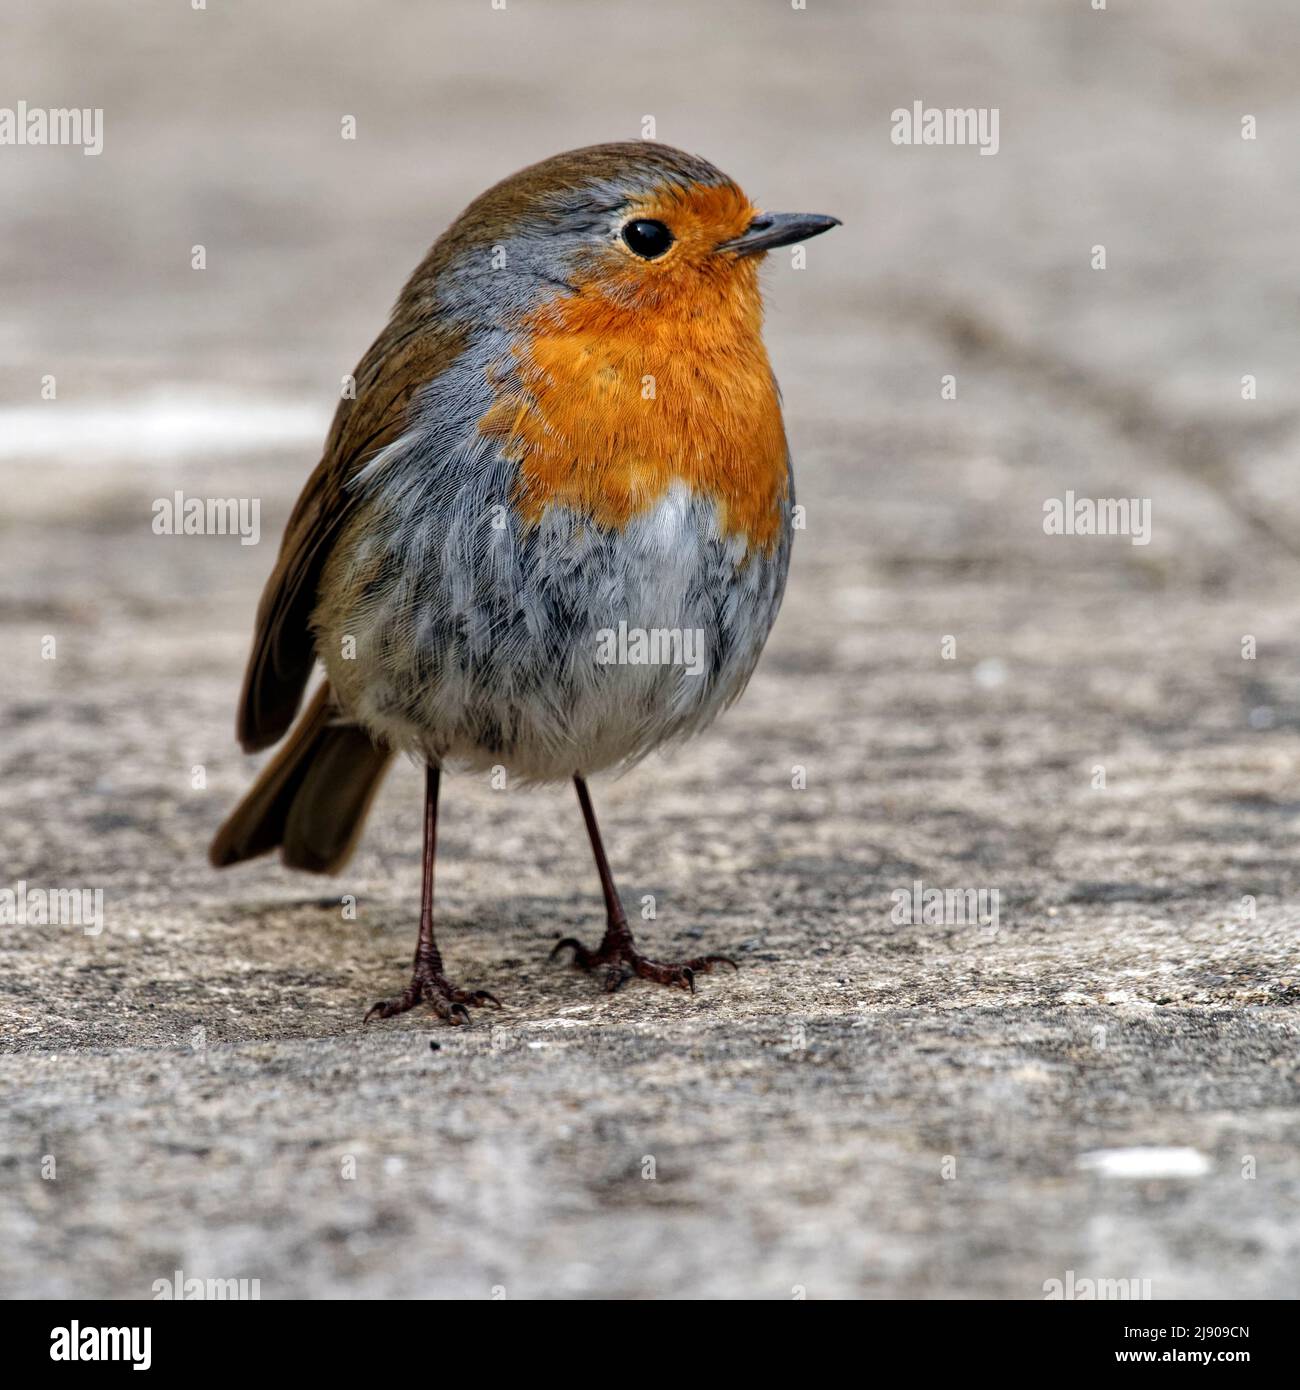 European Robin (Erithacus rubecula) or Robin Red Breast is a common bird ikn English gardens. A friendly bird it sings all year round. Stock Photo